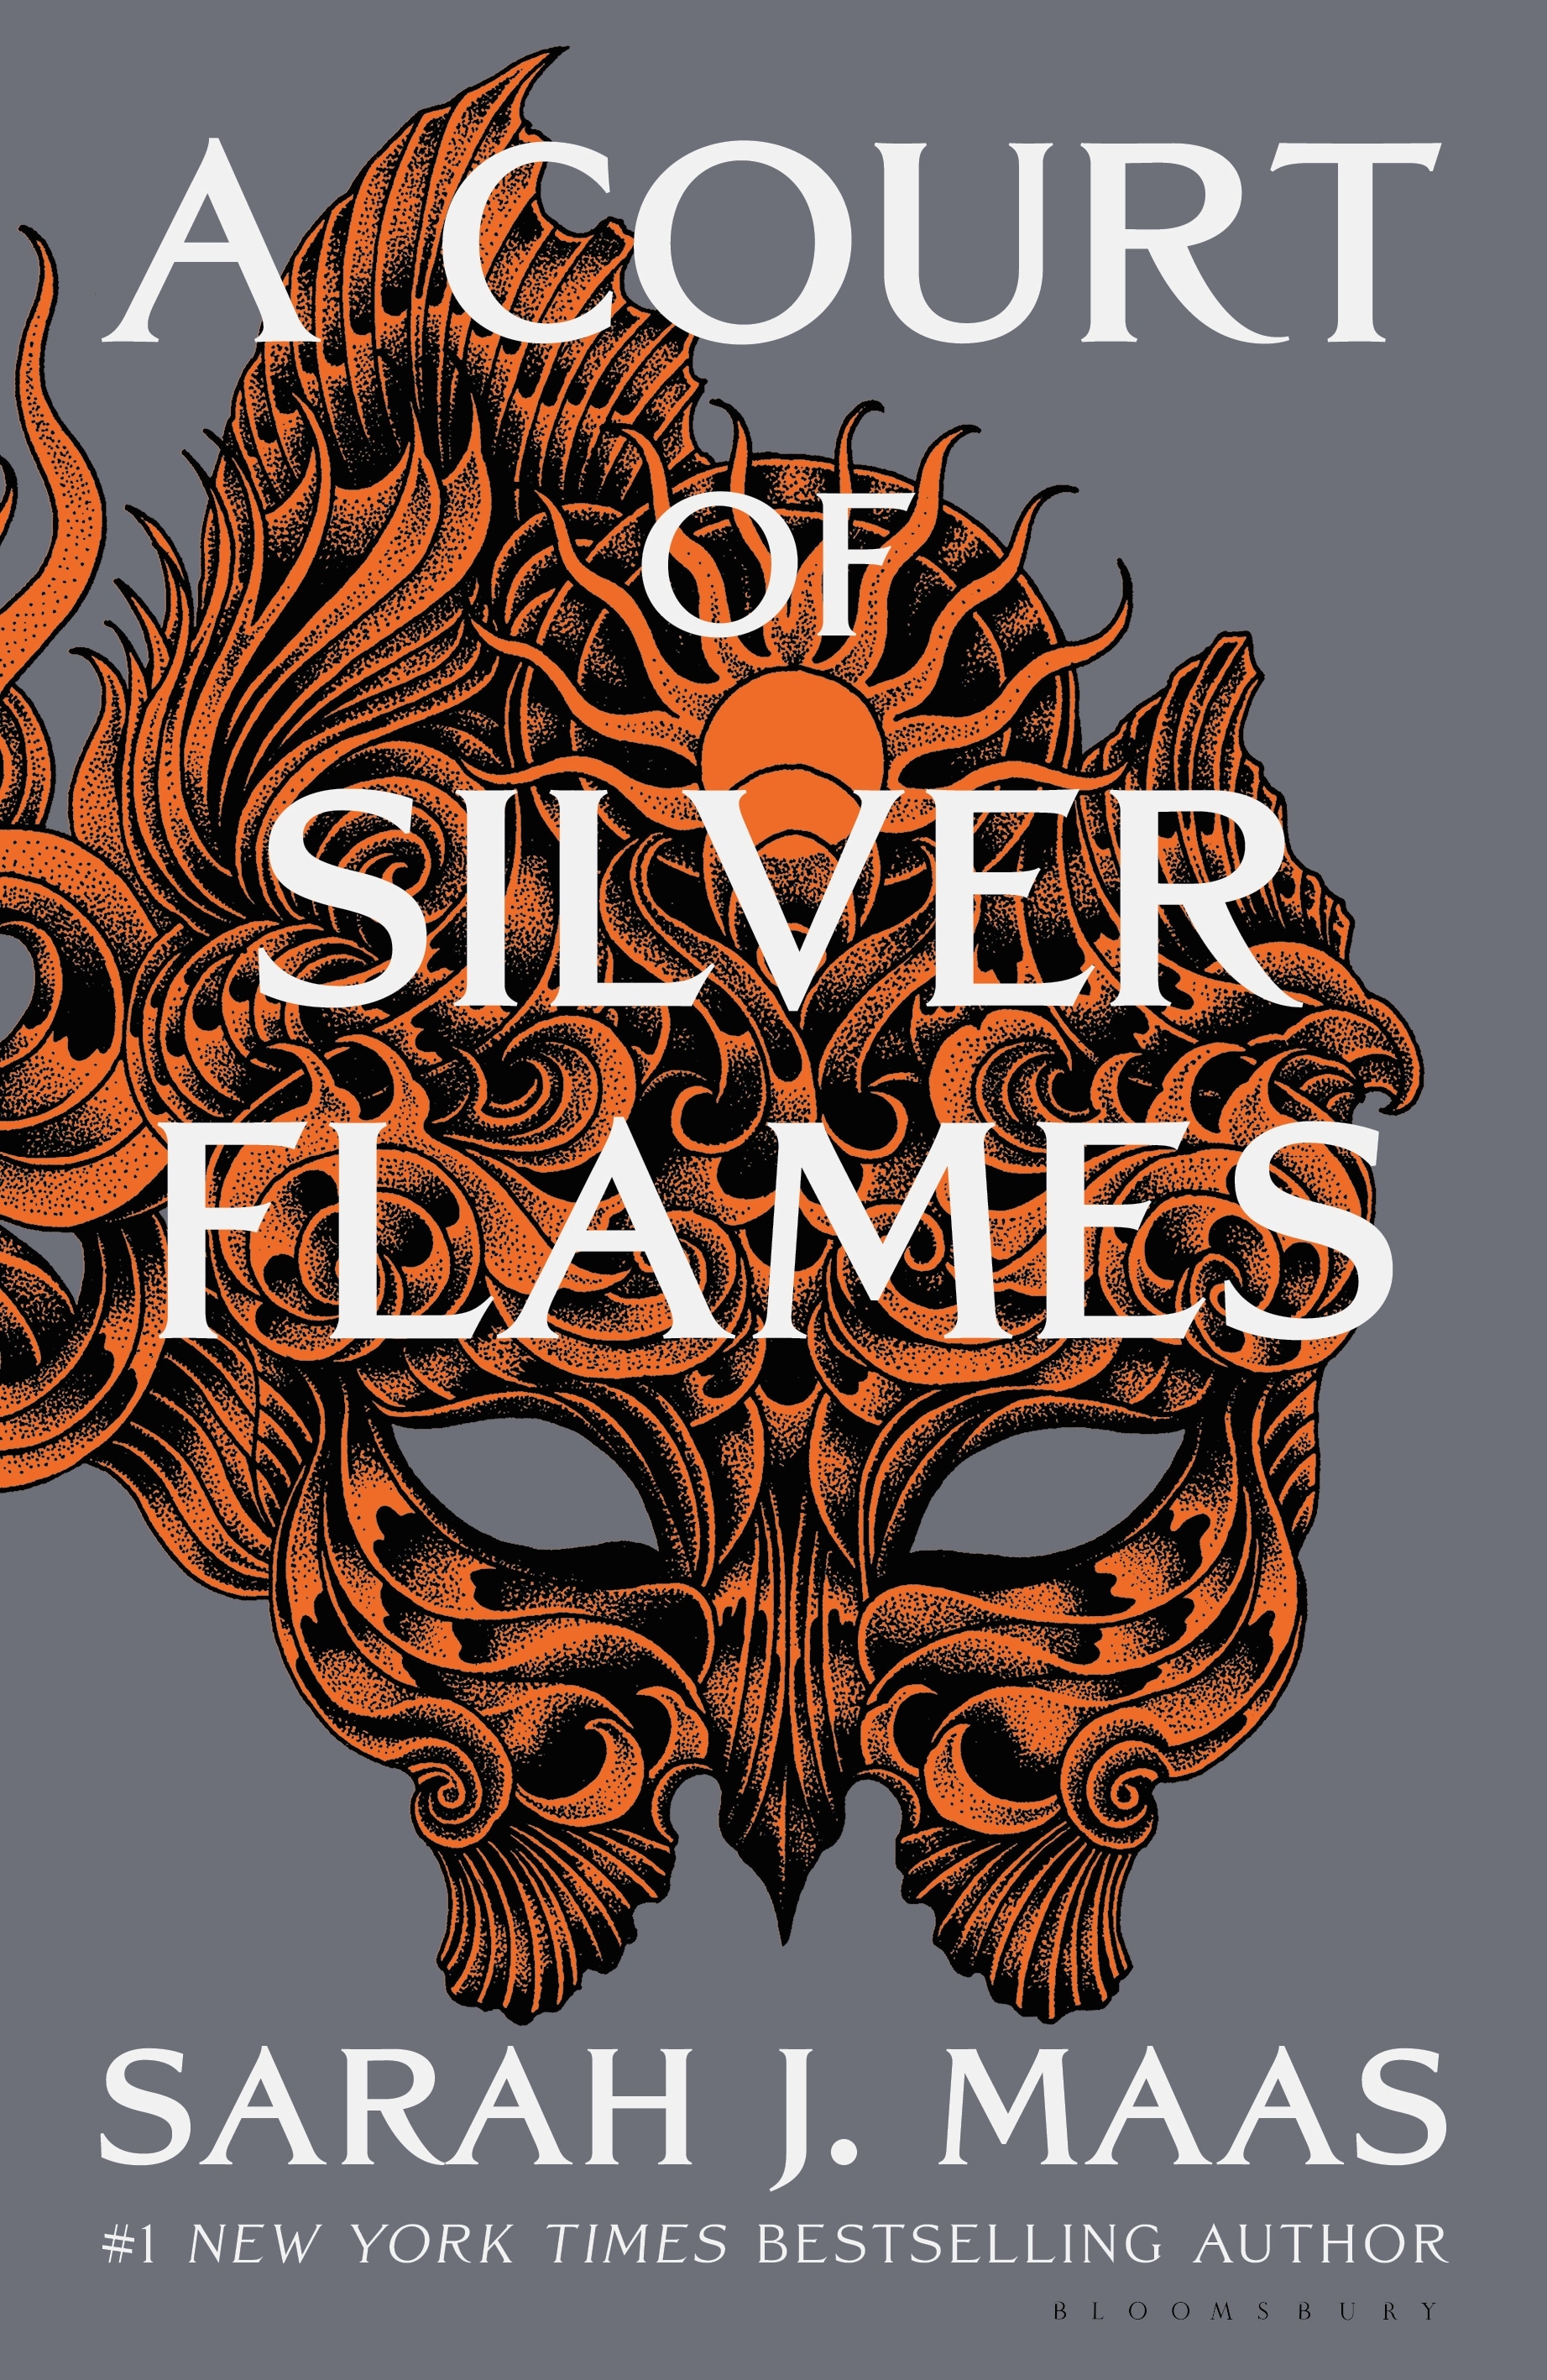 Book “A Court of Silver Flames” by Sarah J. Maas — February 16, 2021